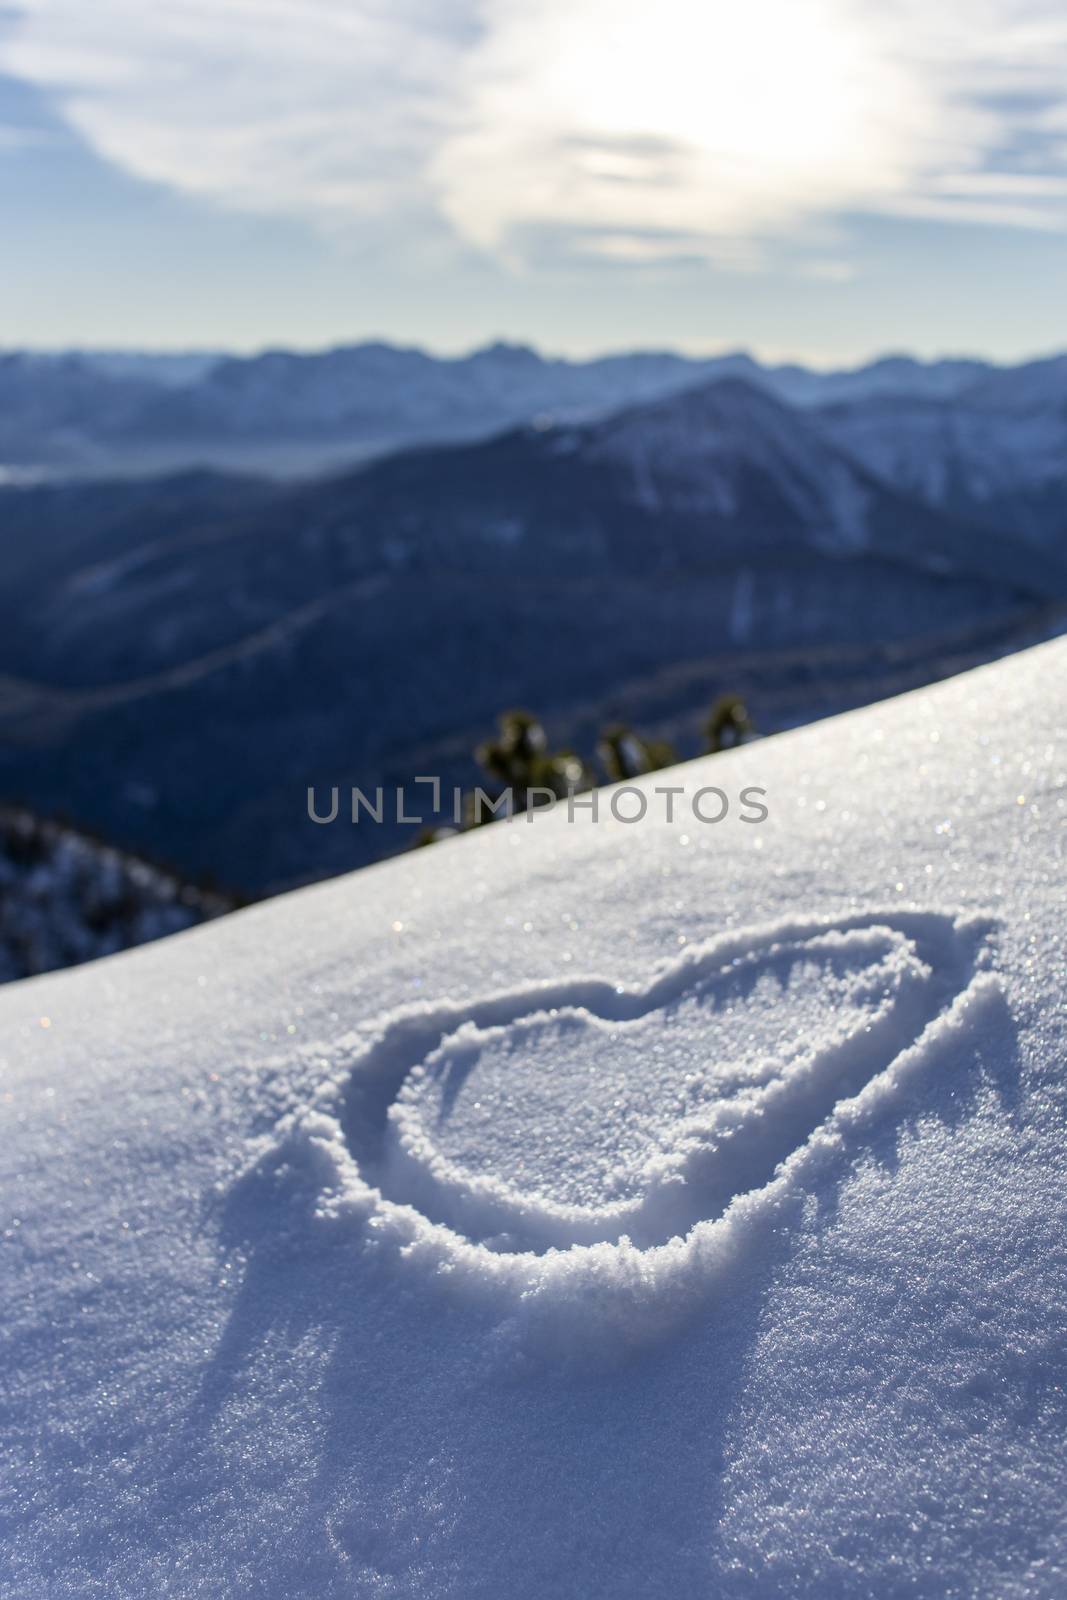 heart drawn in the fresh snow